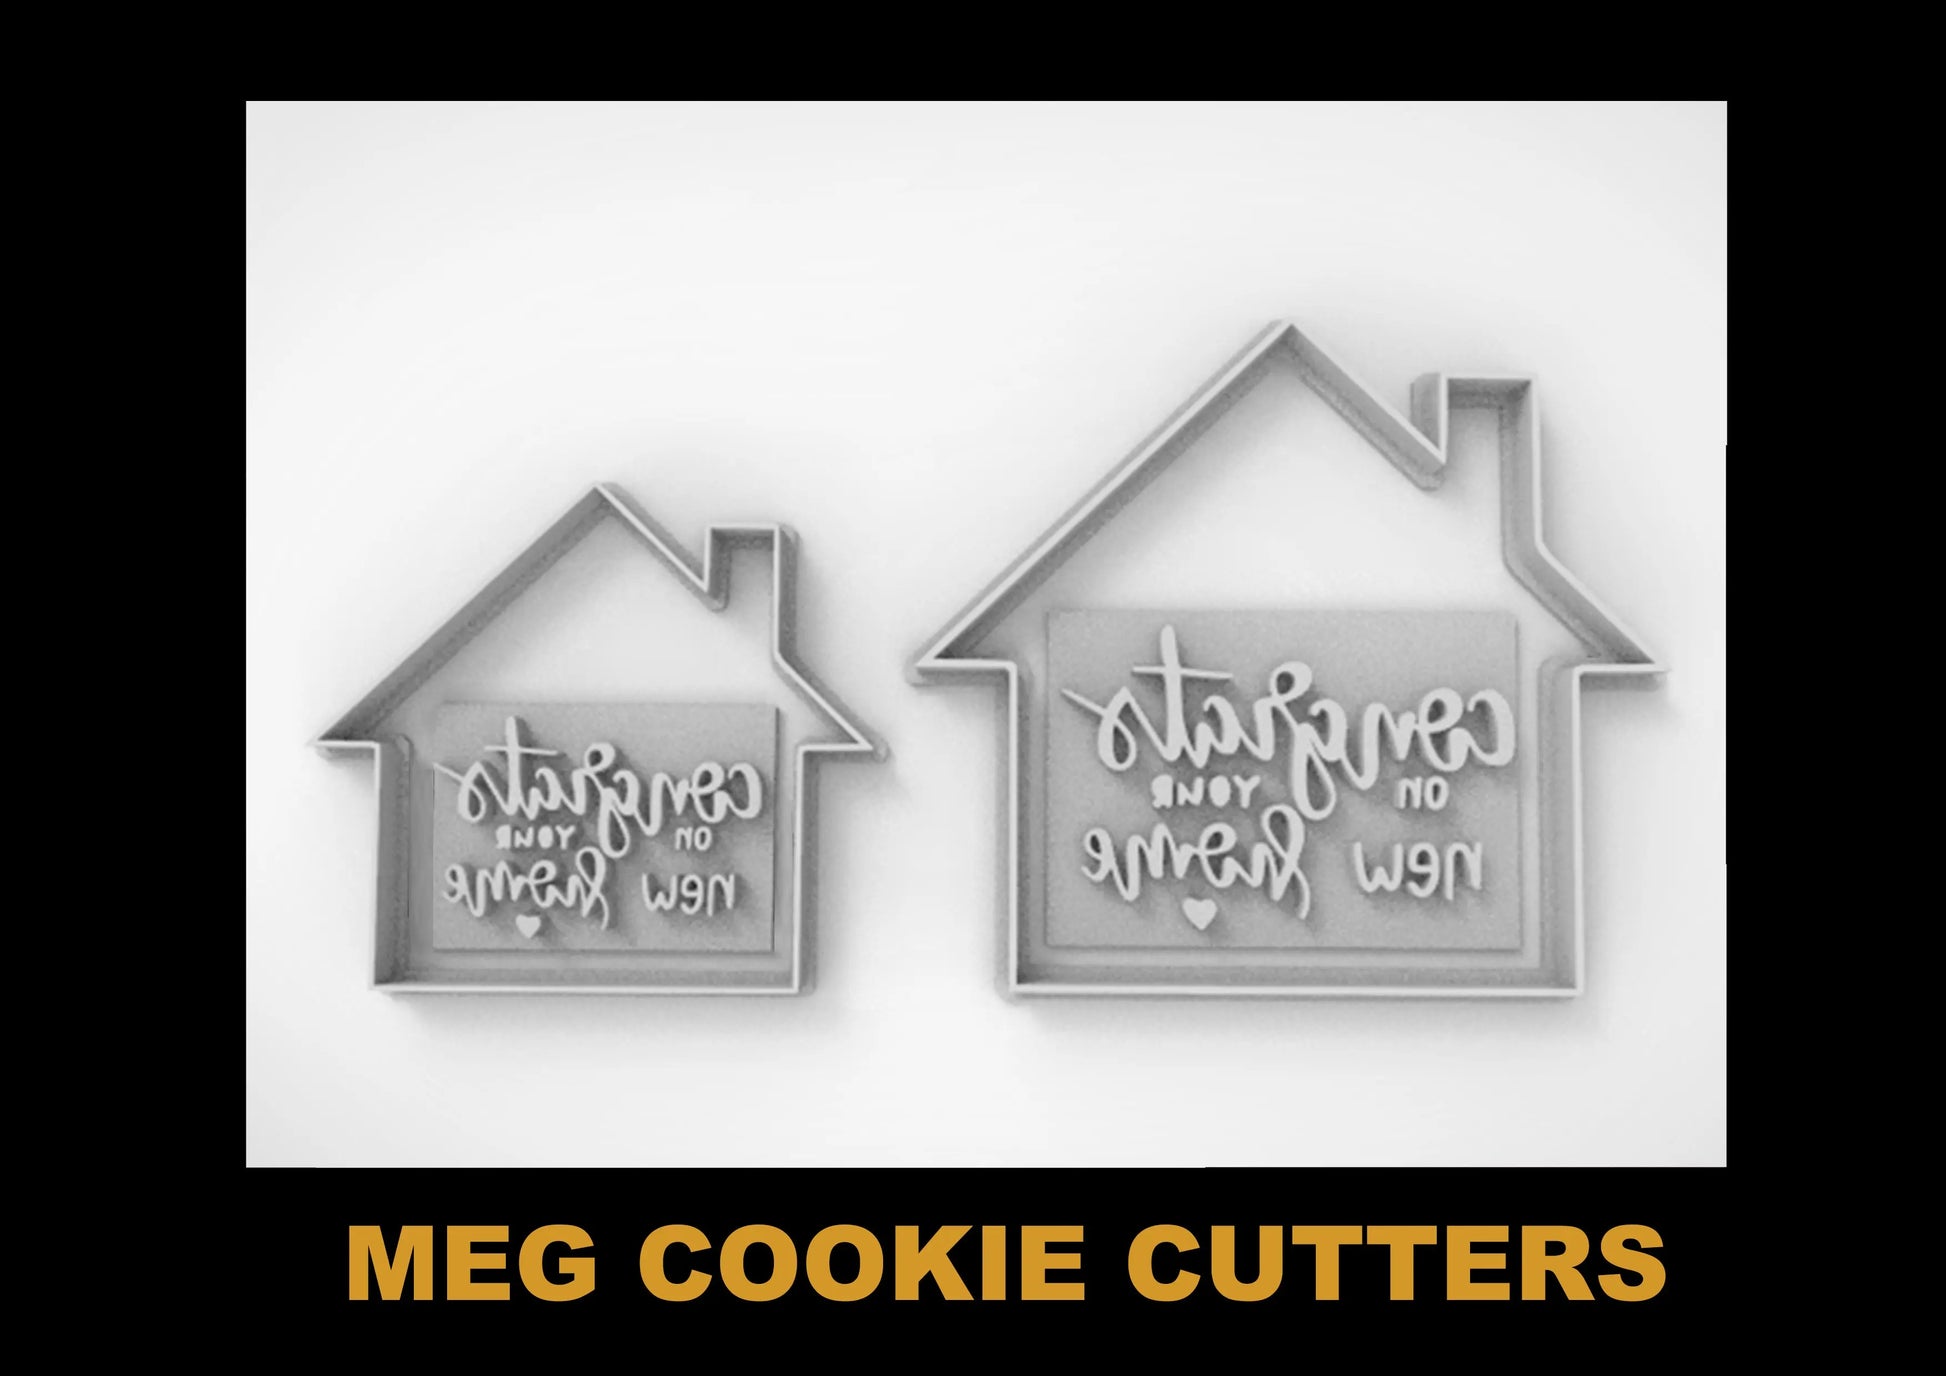 Home / House + stamp congrats cookie cutter Fondant Cutter Cake Decorating 3 - 4 INCHES UK MEG cookie cutters